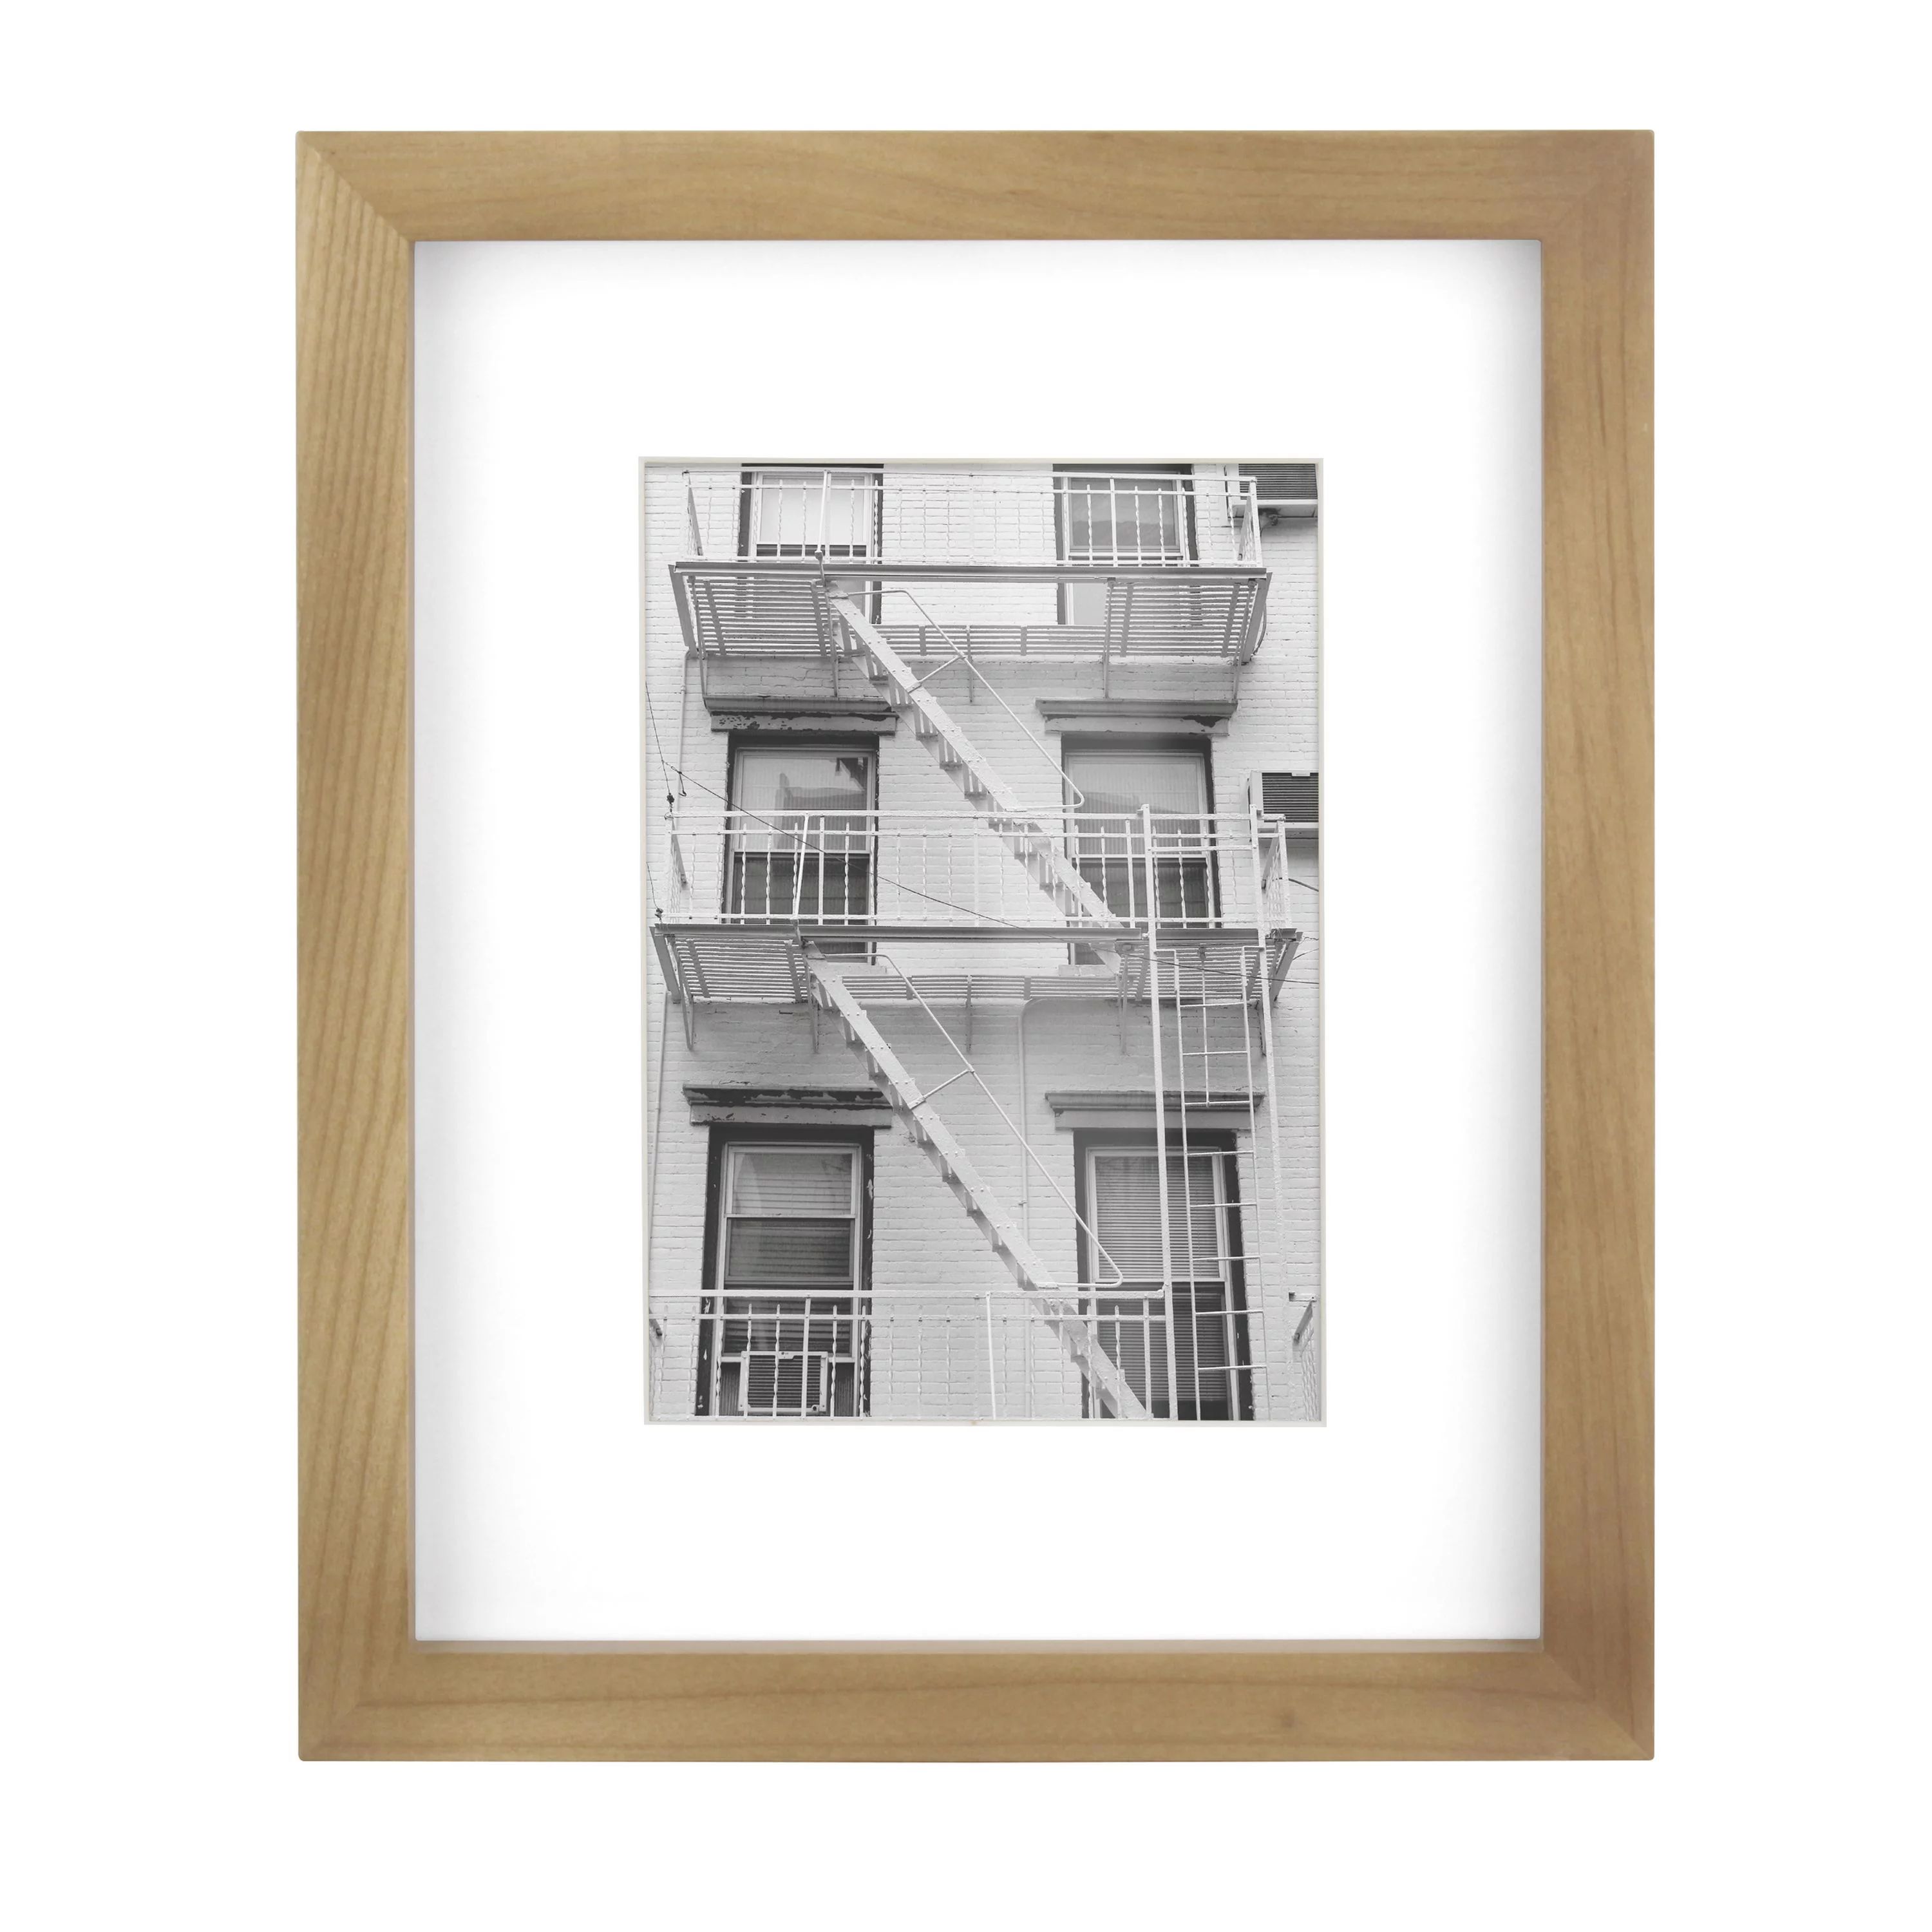 Better Homes & Gardens 8x10 matted to 5x7 Wood Tabletop Picture Frame, Brown | Walmart (US)